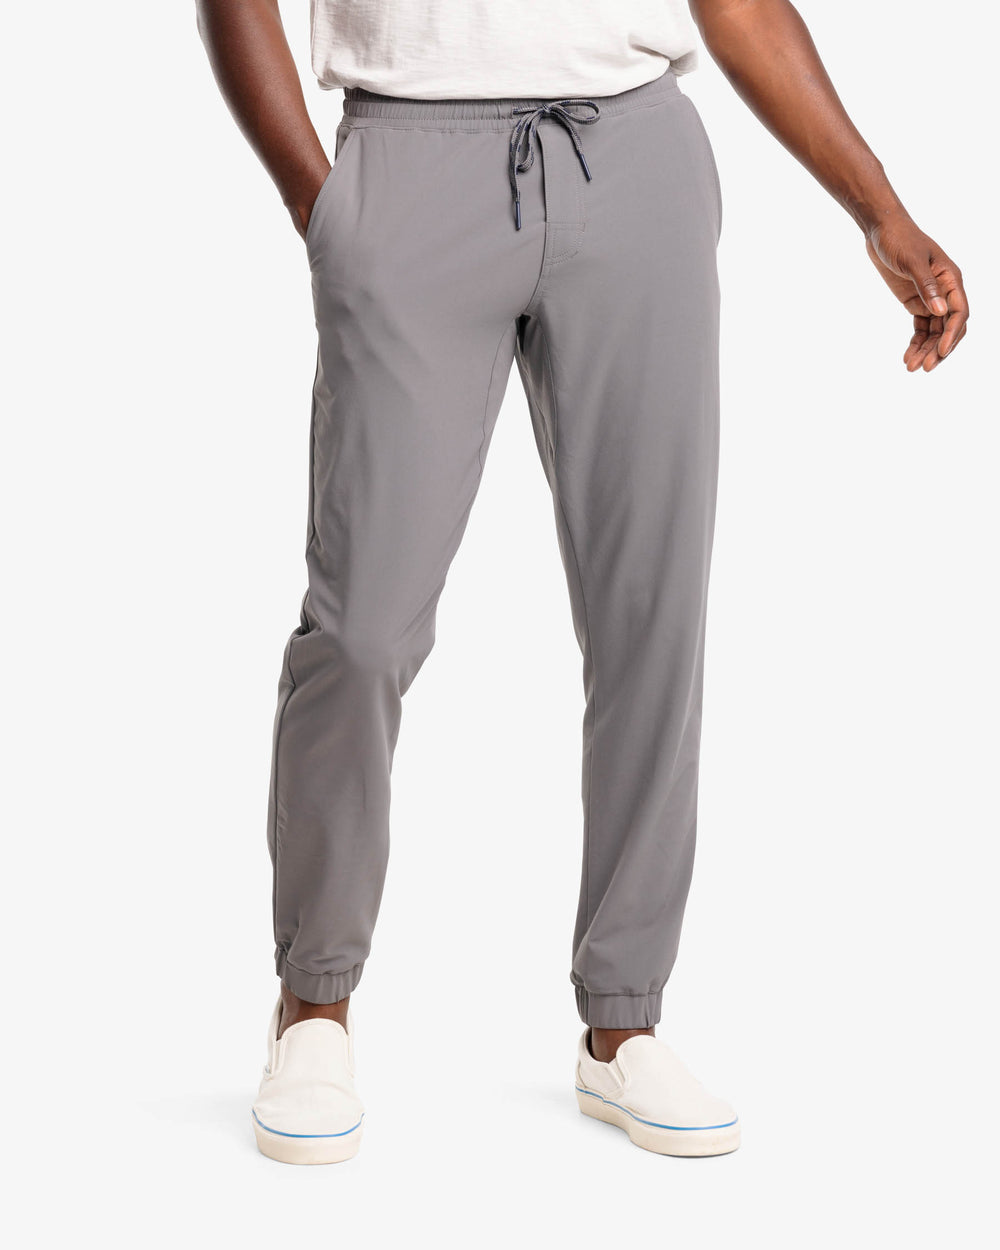 The front view of the The Excursion Performance Jogger by Southern Tide - Smoked Pearl